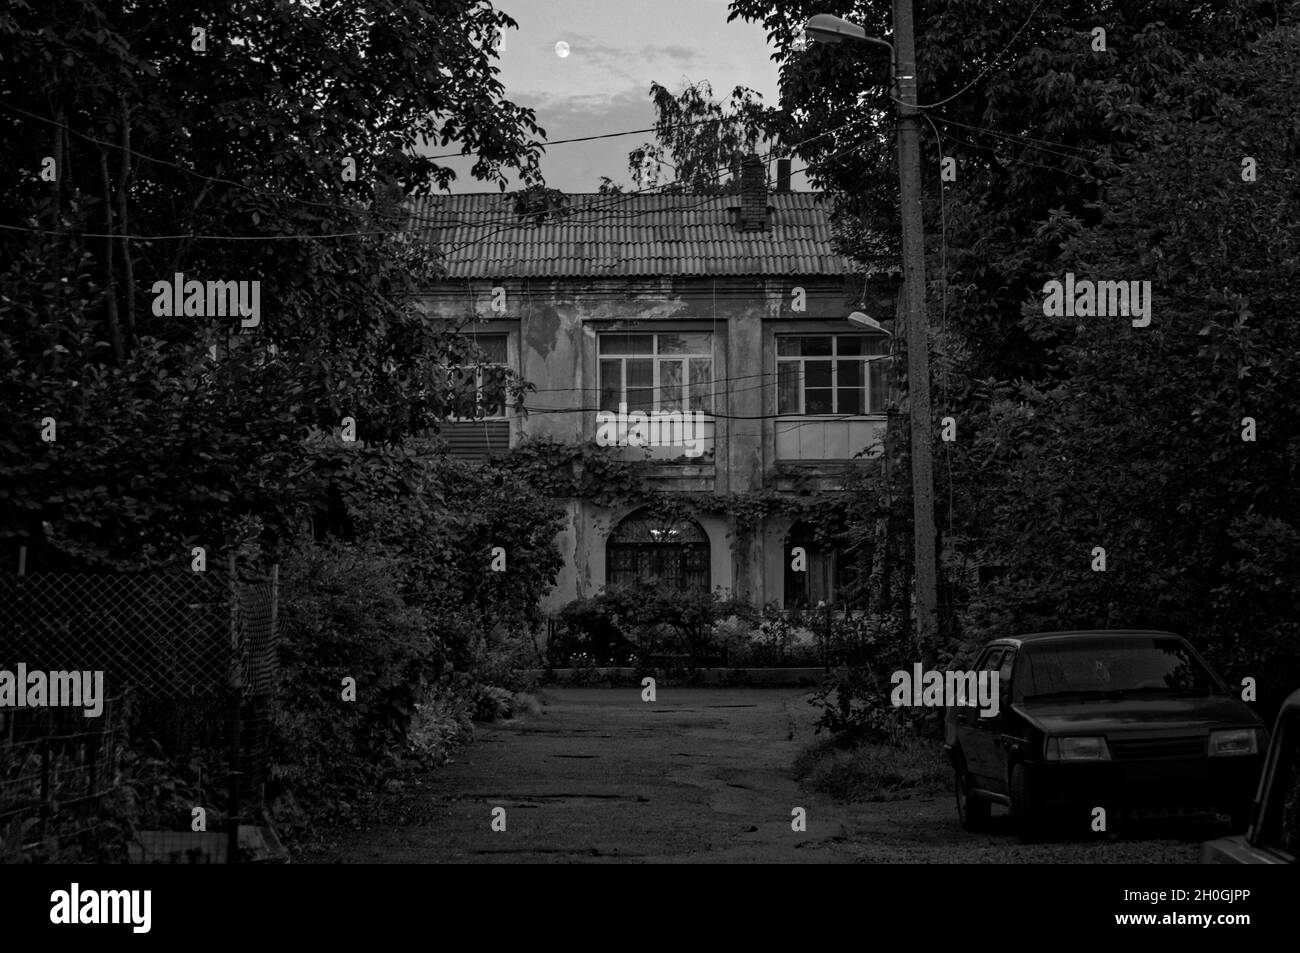 Black and white outdoor photo of a small town old two-story house yard drowned in greenery with an old car parked on the road side in dusk with moon Stock Photo